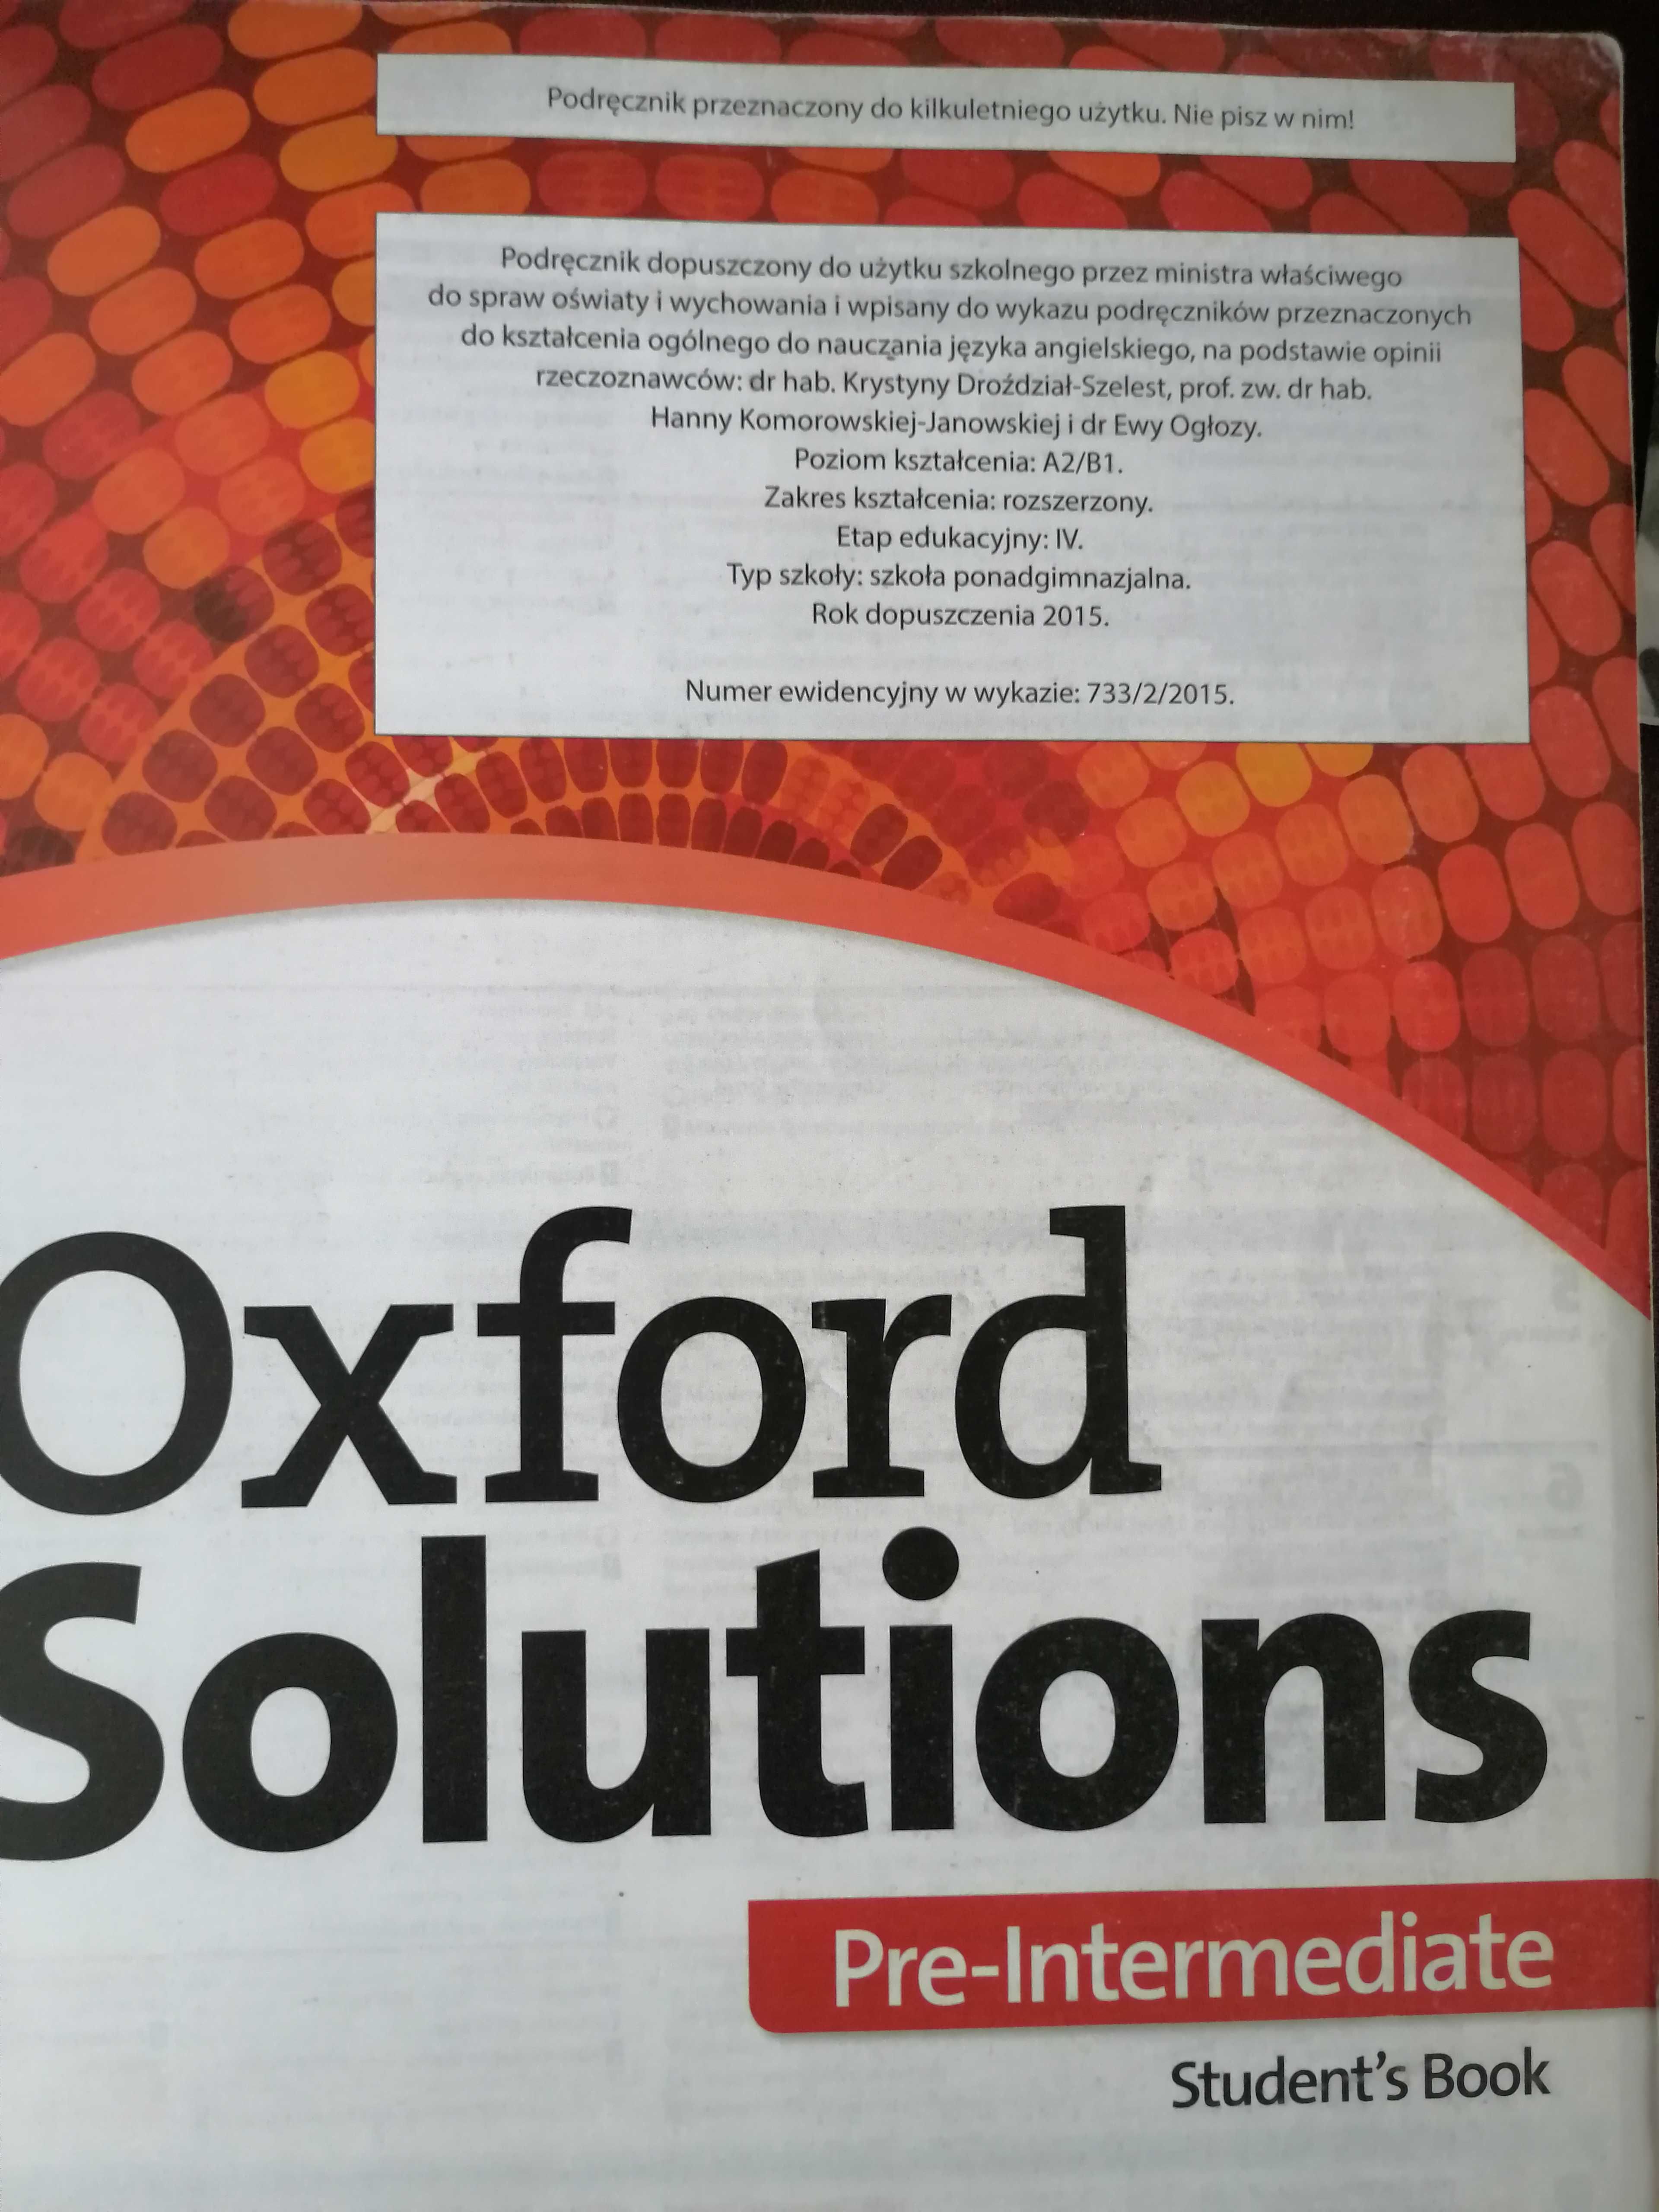 Oxford Solutions